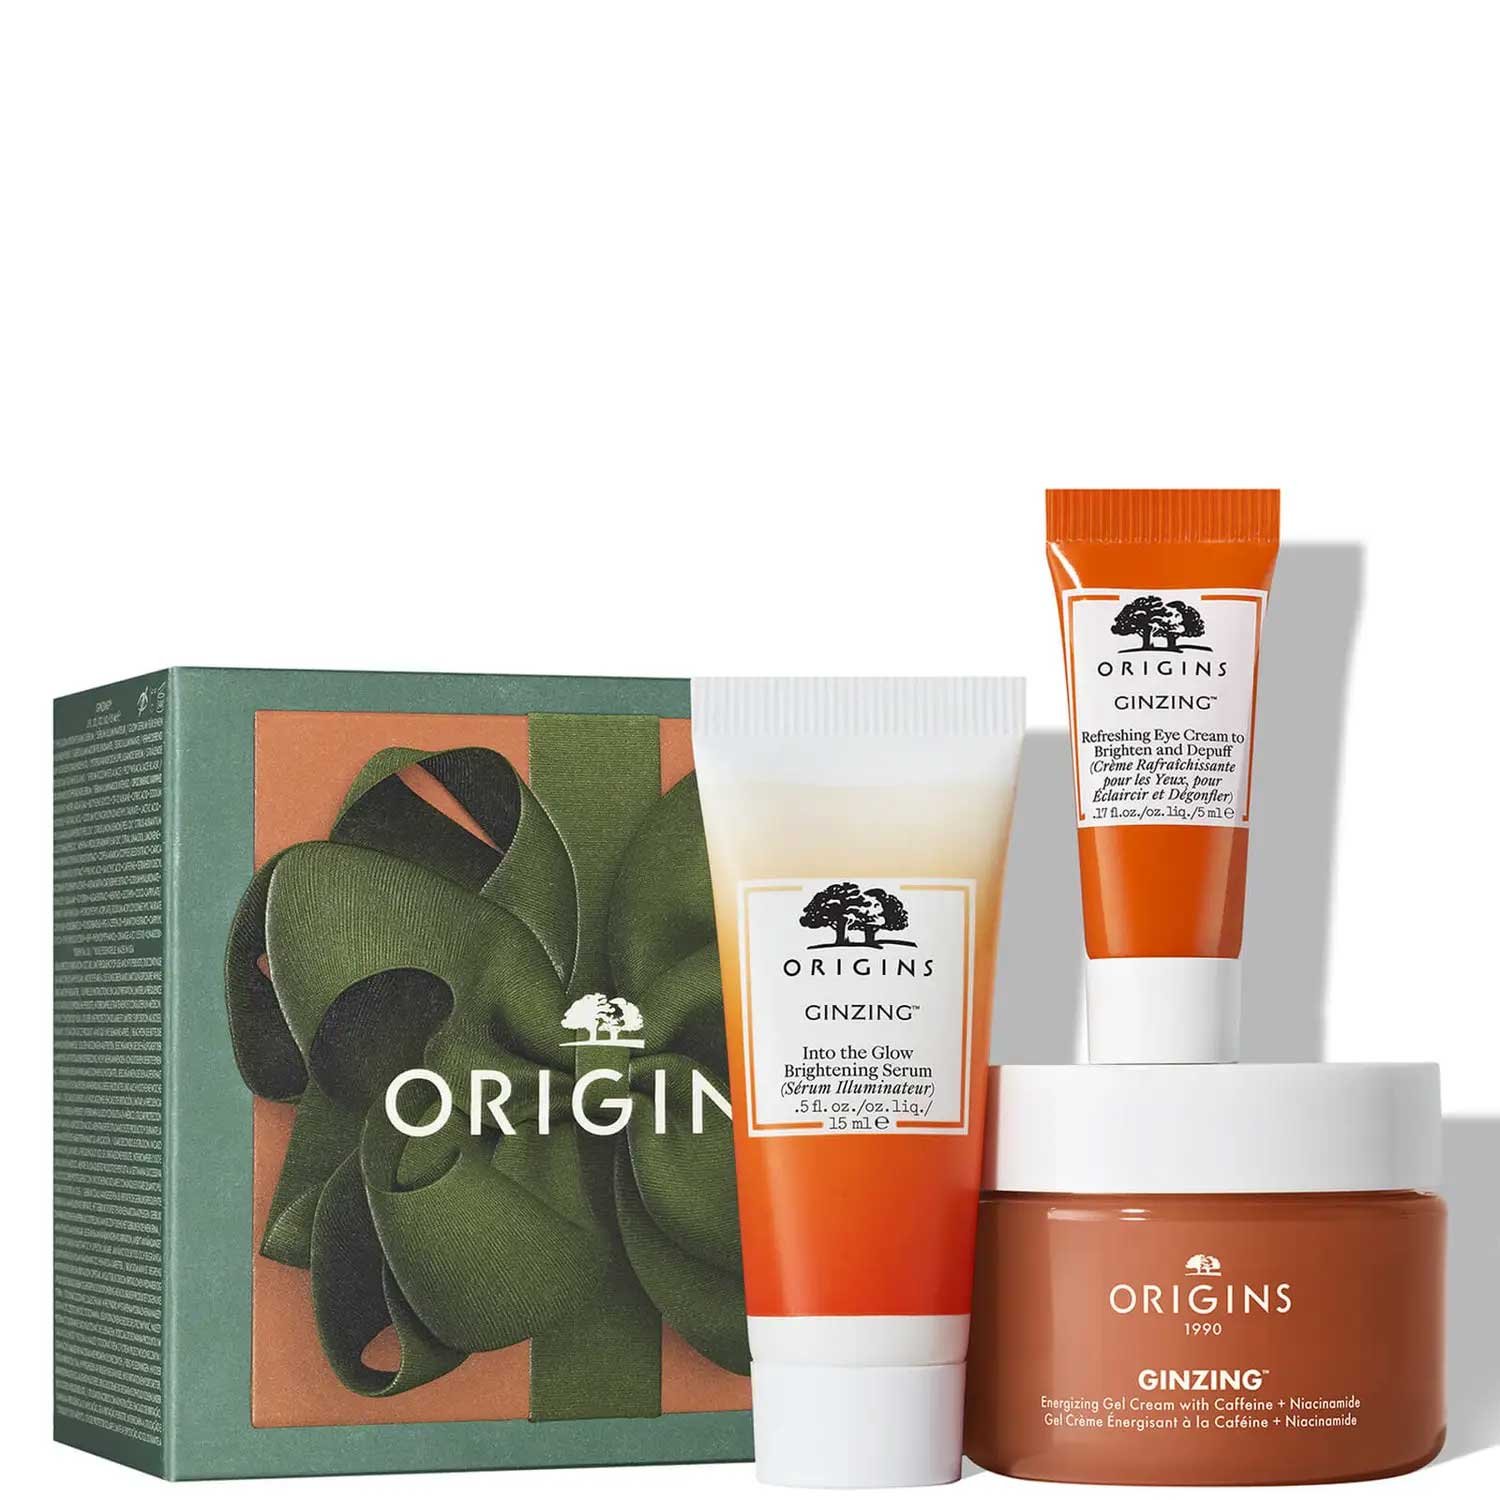 most wanted gifts for her - Origins Radiance Boosting Vitamin C Ginzing Gift Set: A Coveted Treasure for Her